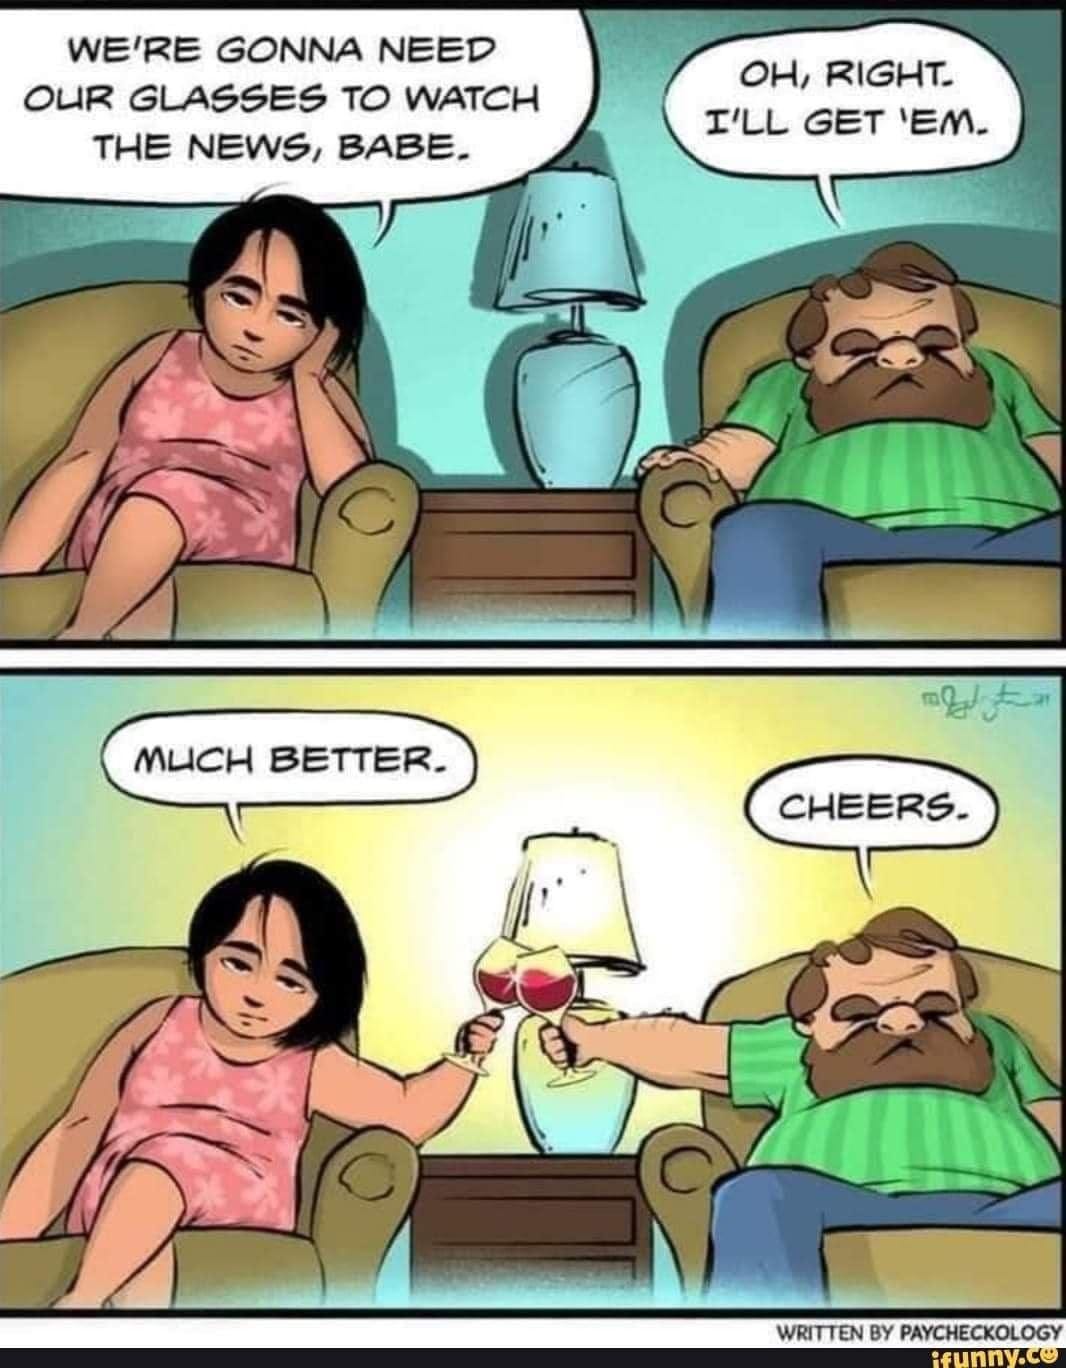 May be a cartoon of 2 people and text that says 'WE'RE GONNA NEED OUIR GLASSES TO WATCH THE NEWS, BABE. oH, RIGHT. I'LL GET 'EM. MUCH BETTER. തലക CHEERS. WRITTEN BY PAYCHECKOLOGY ifunny.cm'